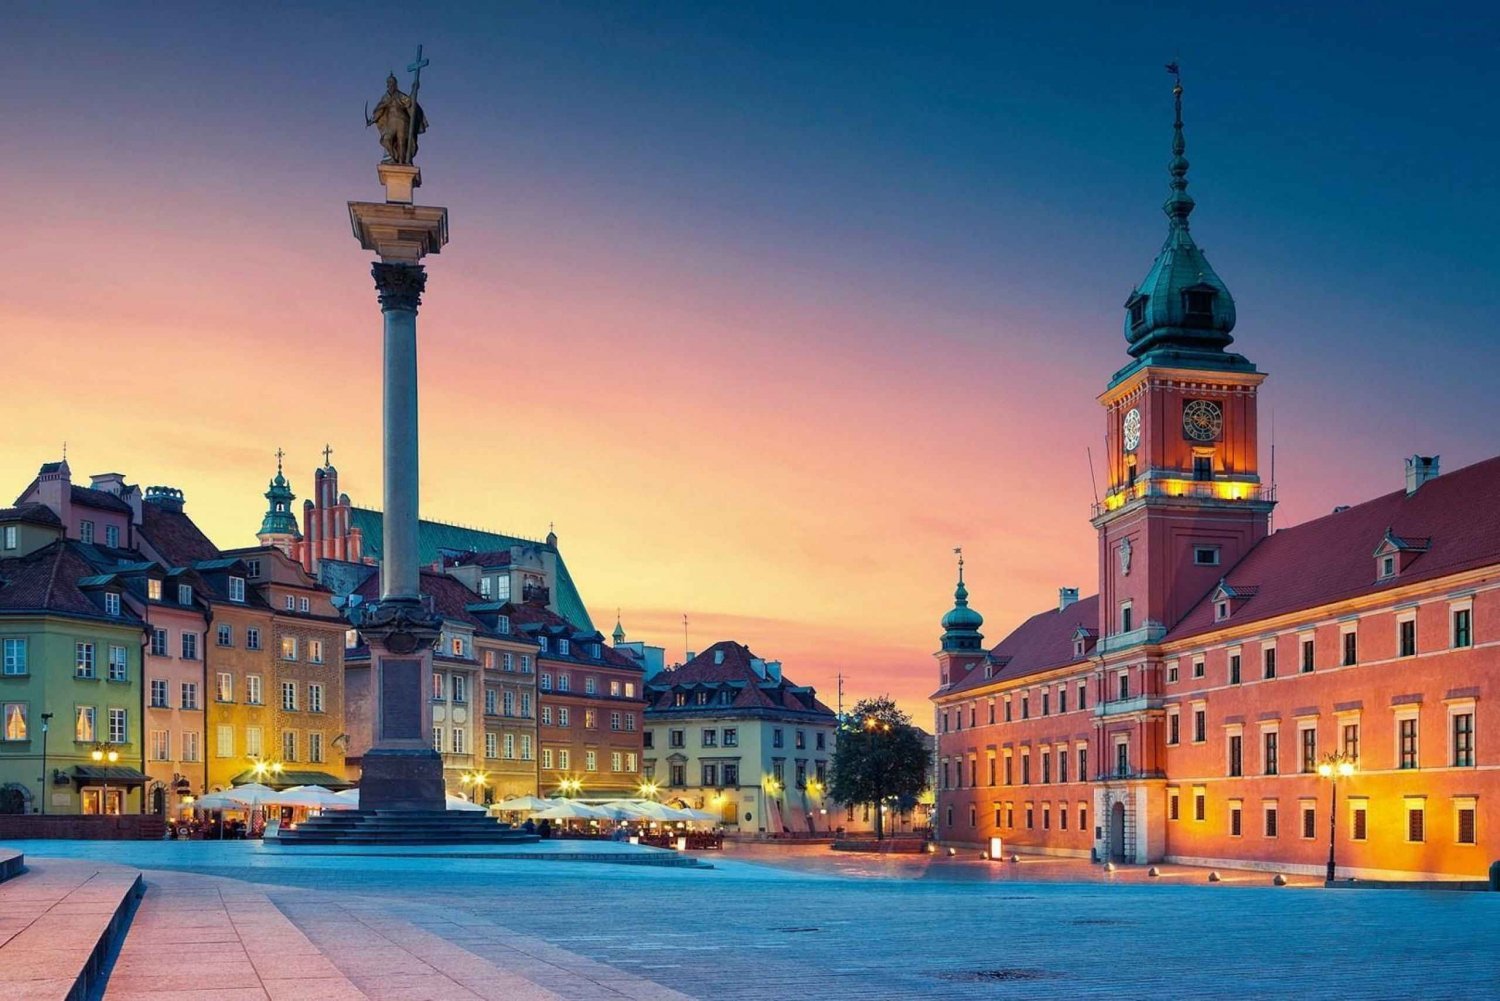 5 hour: Warsaw Old Town, Royal Castle and Uprising Museum